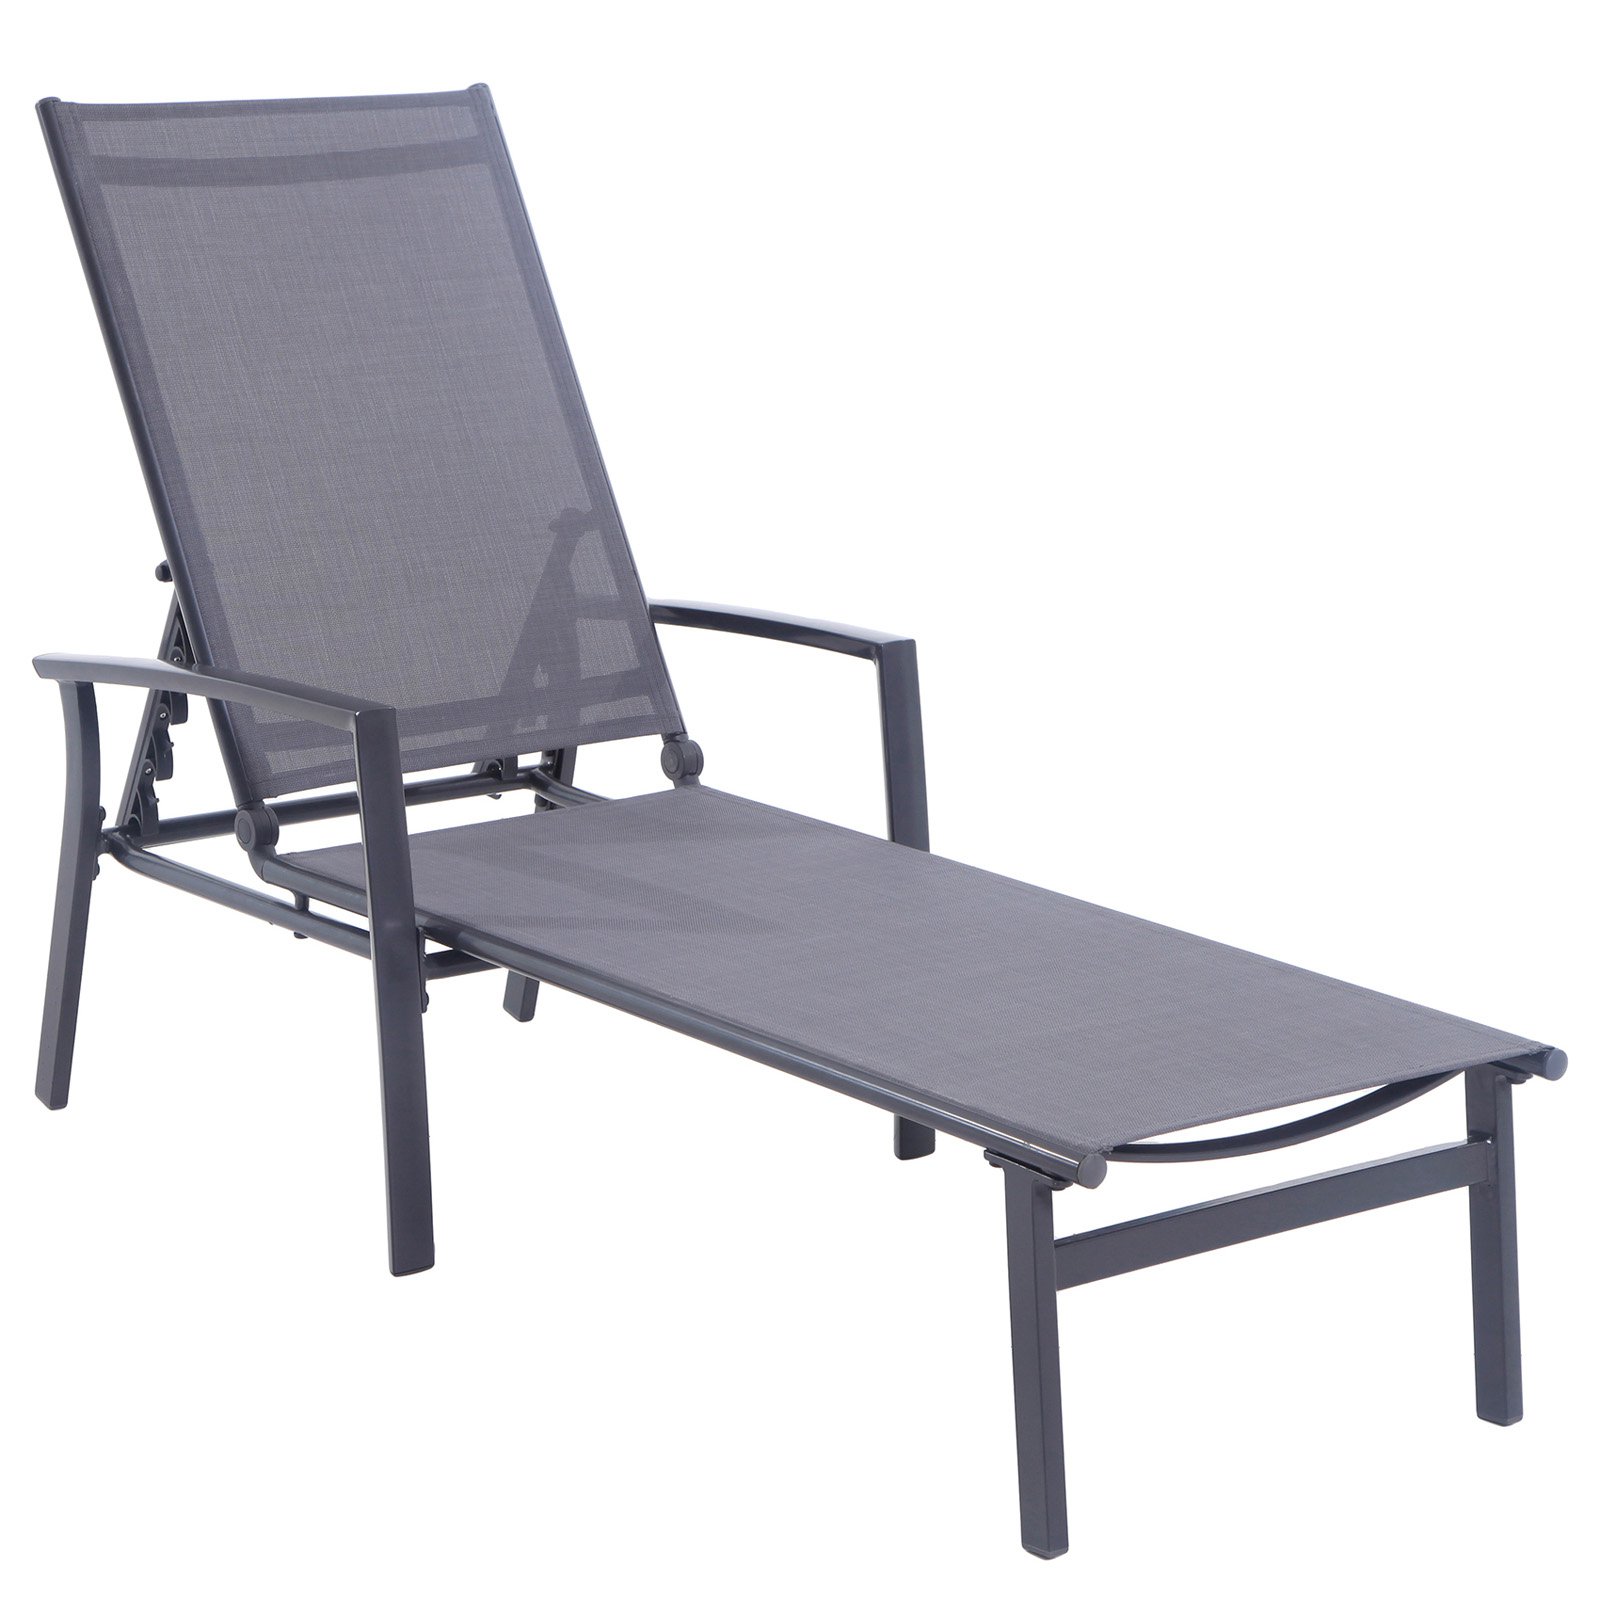 Hanover Naples Outdoor Folding Chaise Lounge Chair with Adjustable Backrest | Patio and Poolside Lounging Chair | UV and Weather-Resistant Sling Fabric | NAPLESCHS-GRY - image 3 of 16